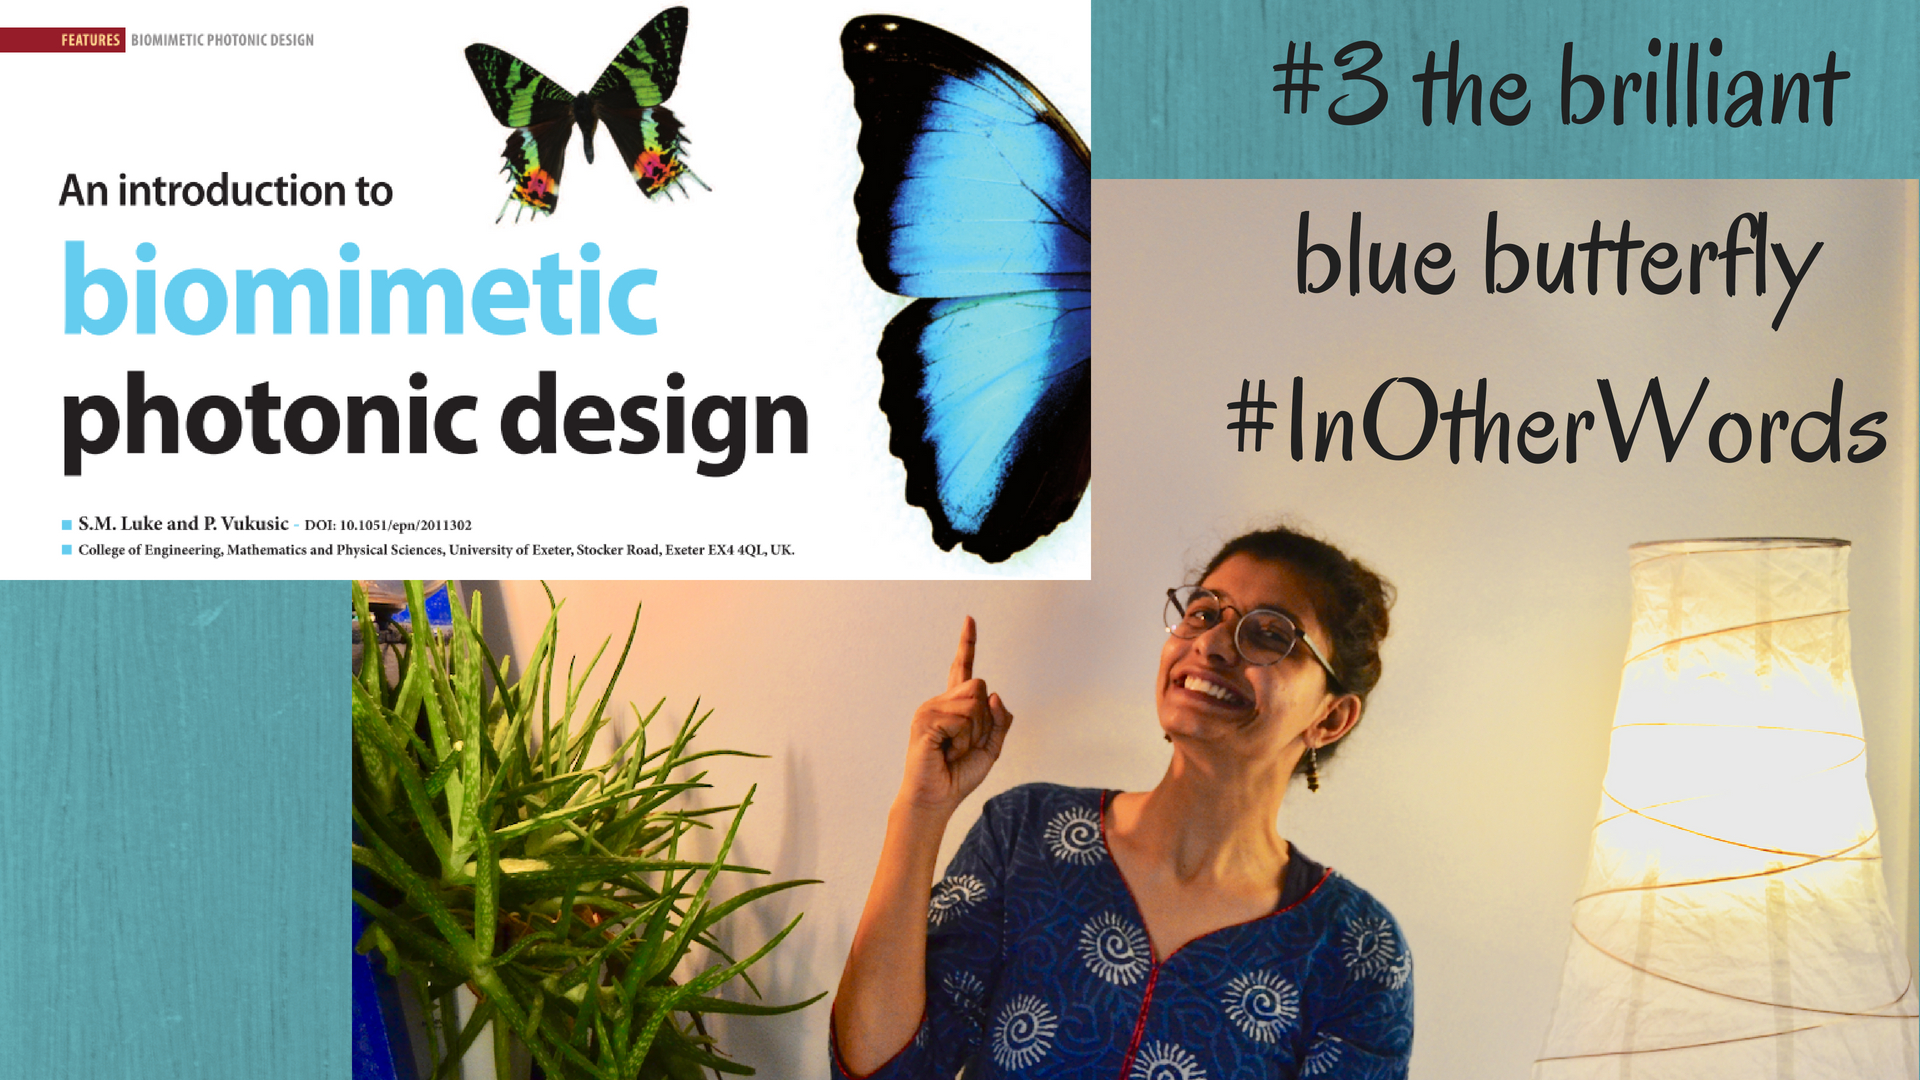 #3 the brilliant blue butterfly | #InOtherWords